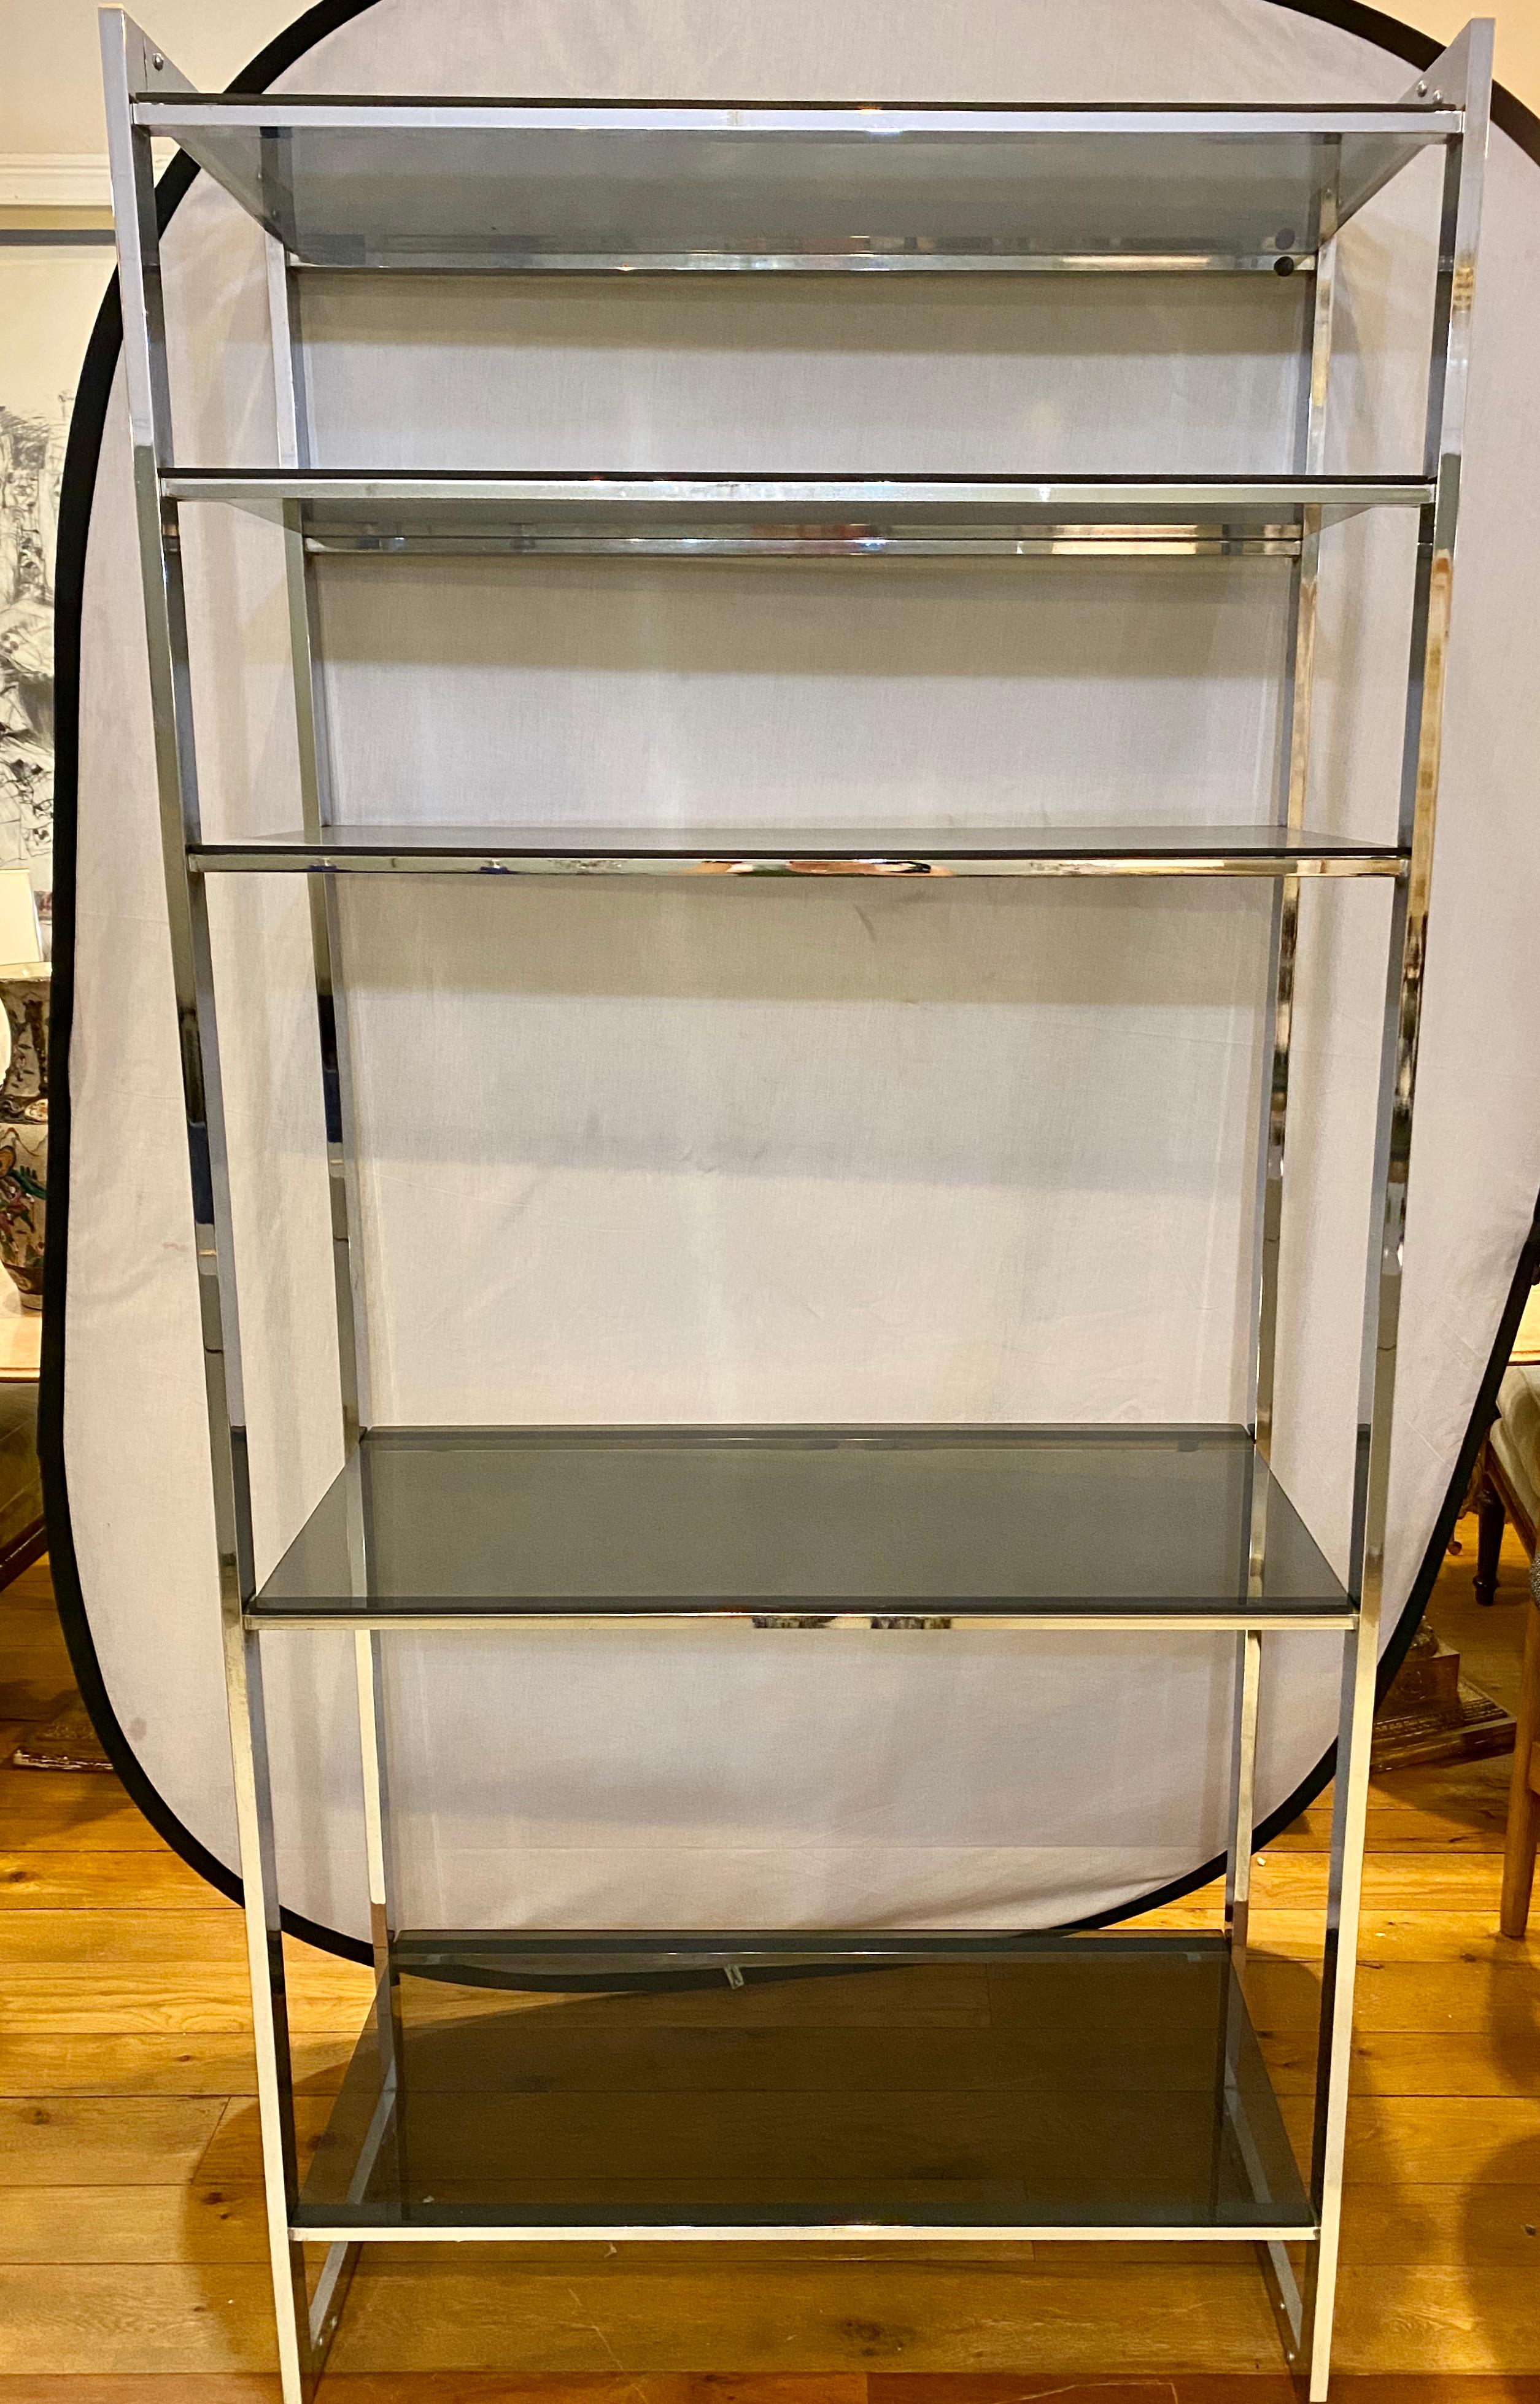 Mid-Century Modern étagère chrome base smoke glass shelves. This sleek and stylish shelving unit is simply stunning and is certain to make a fine addition to any space in the home.